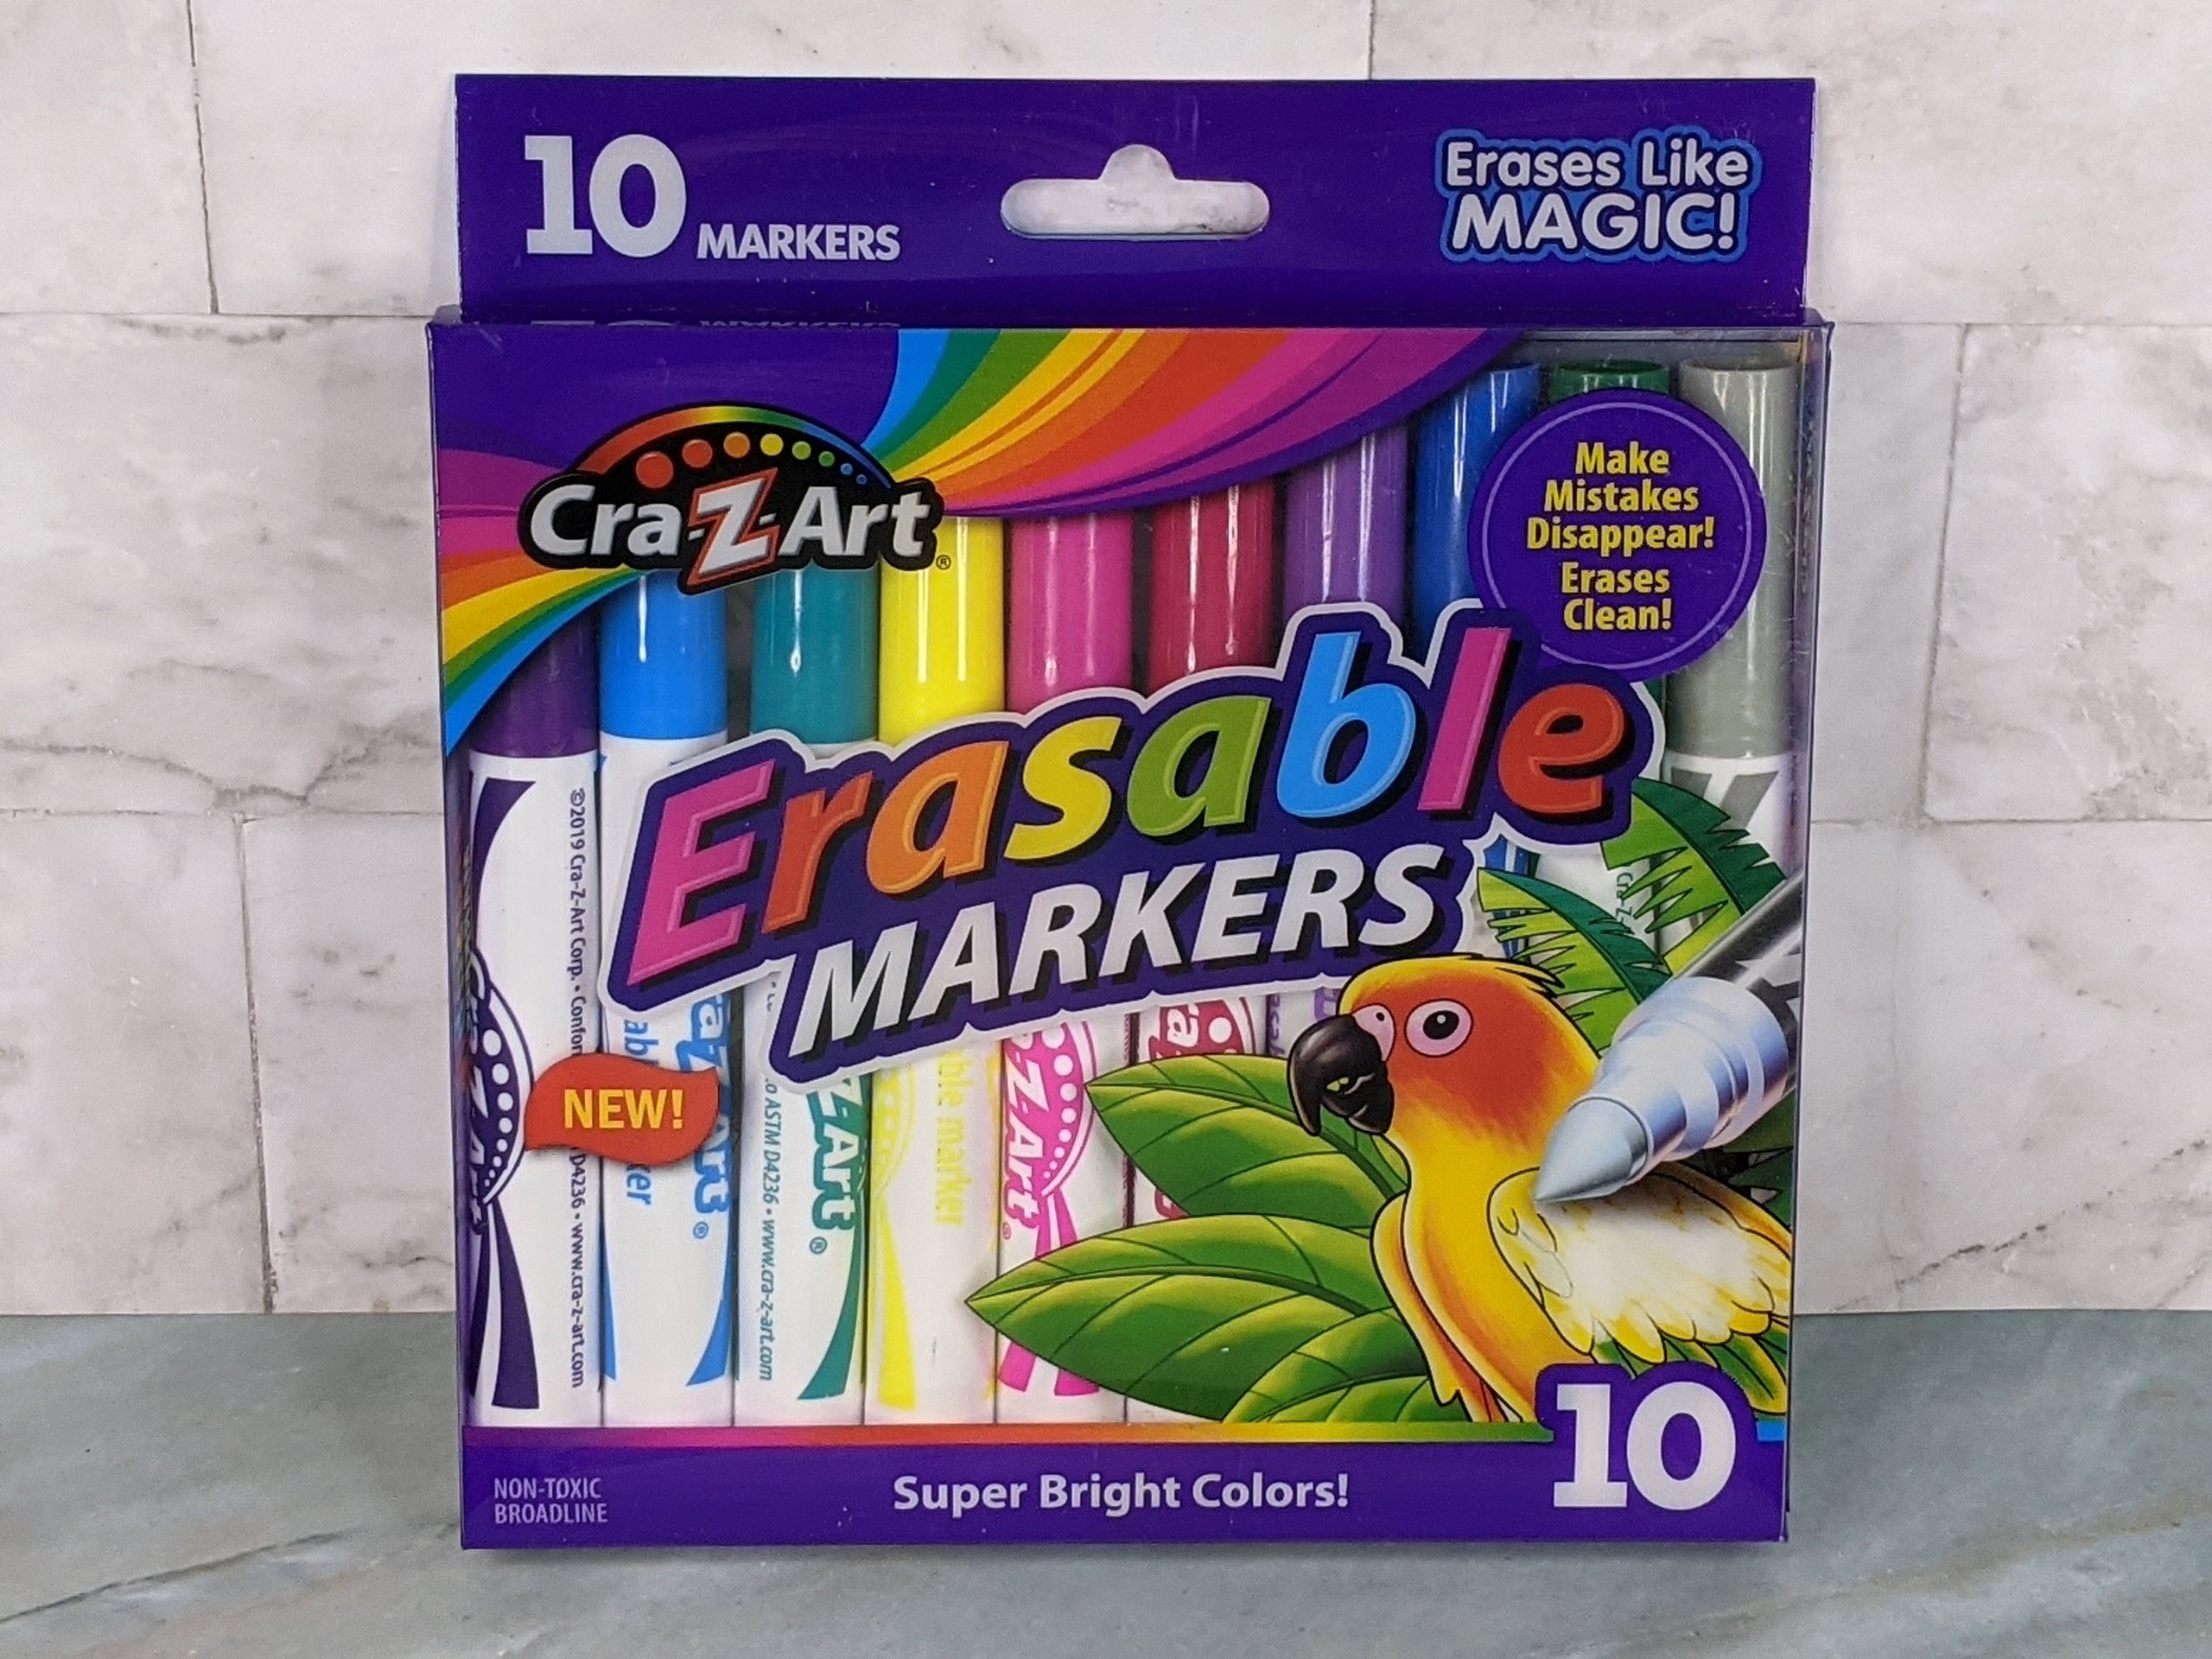 Erasable Markers